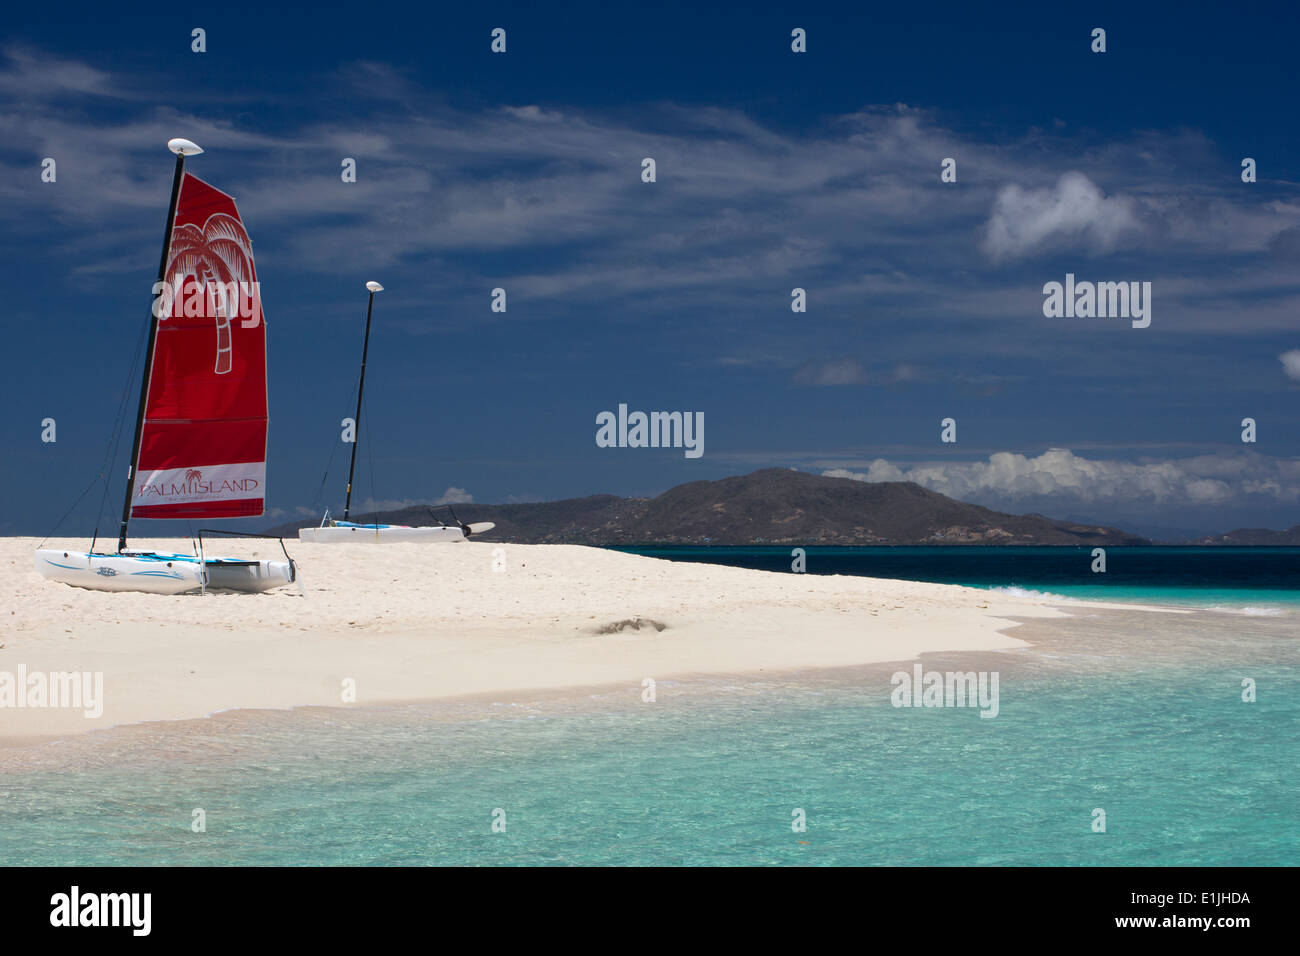 Palm Island - Red Sail, Turquoise Caribbean Ocean and Coral Sand. Stock Photo